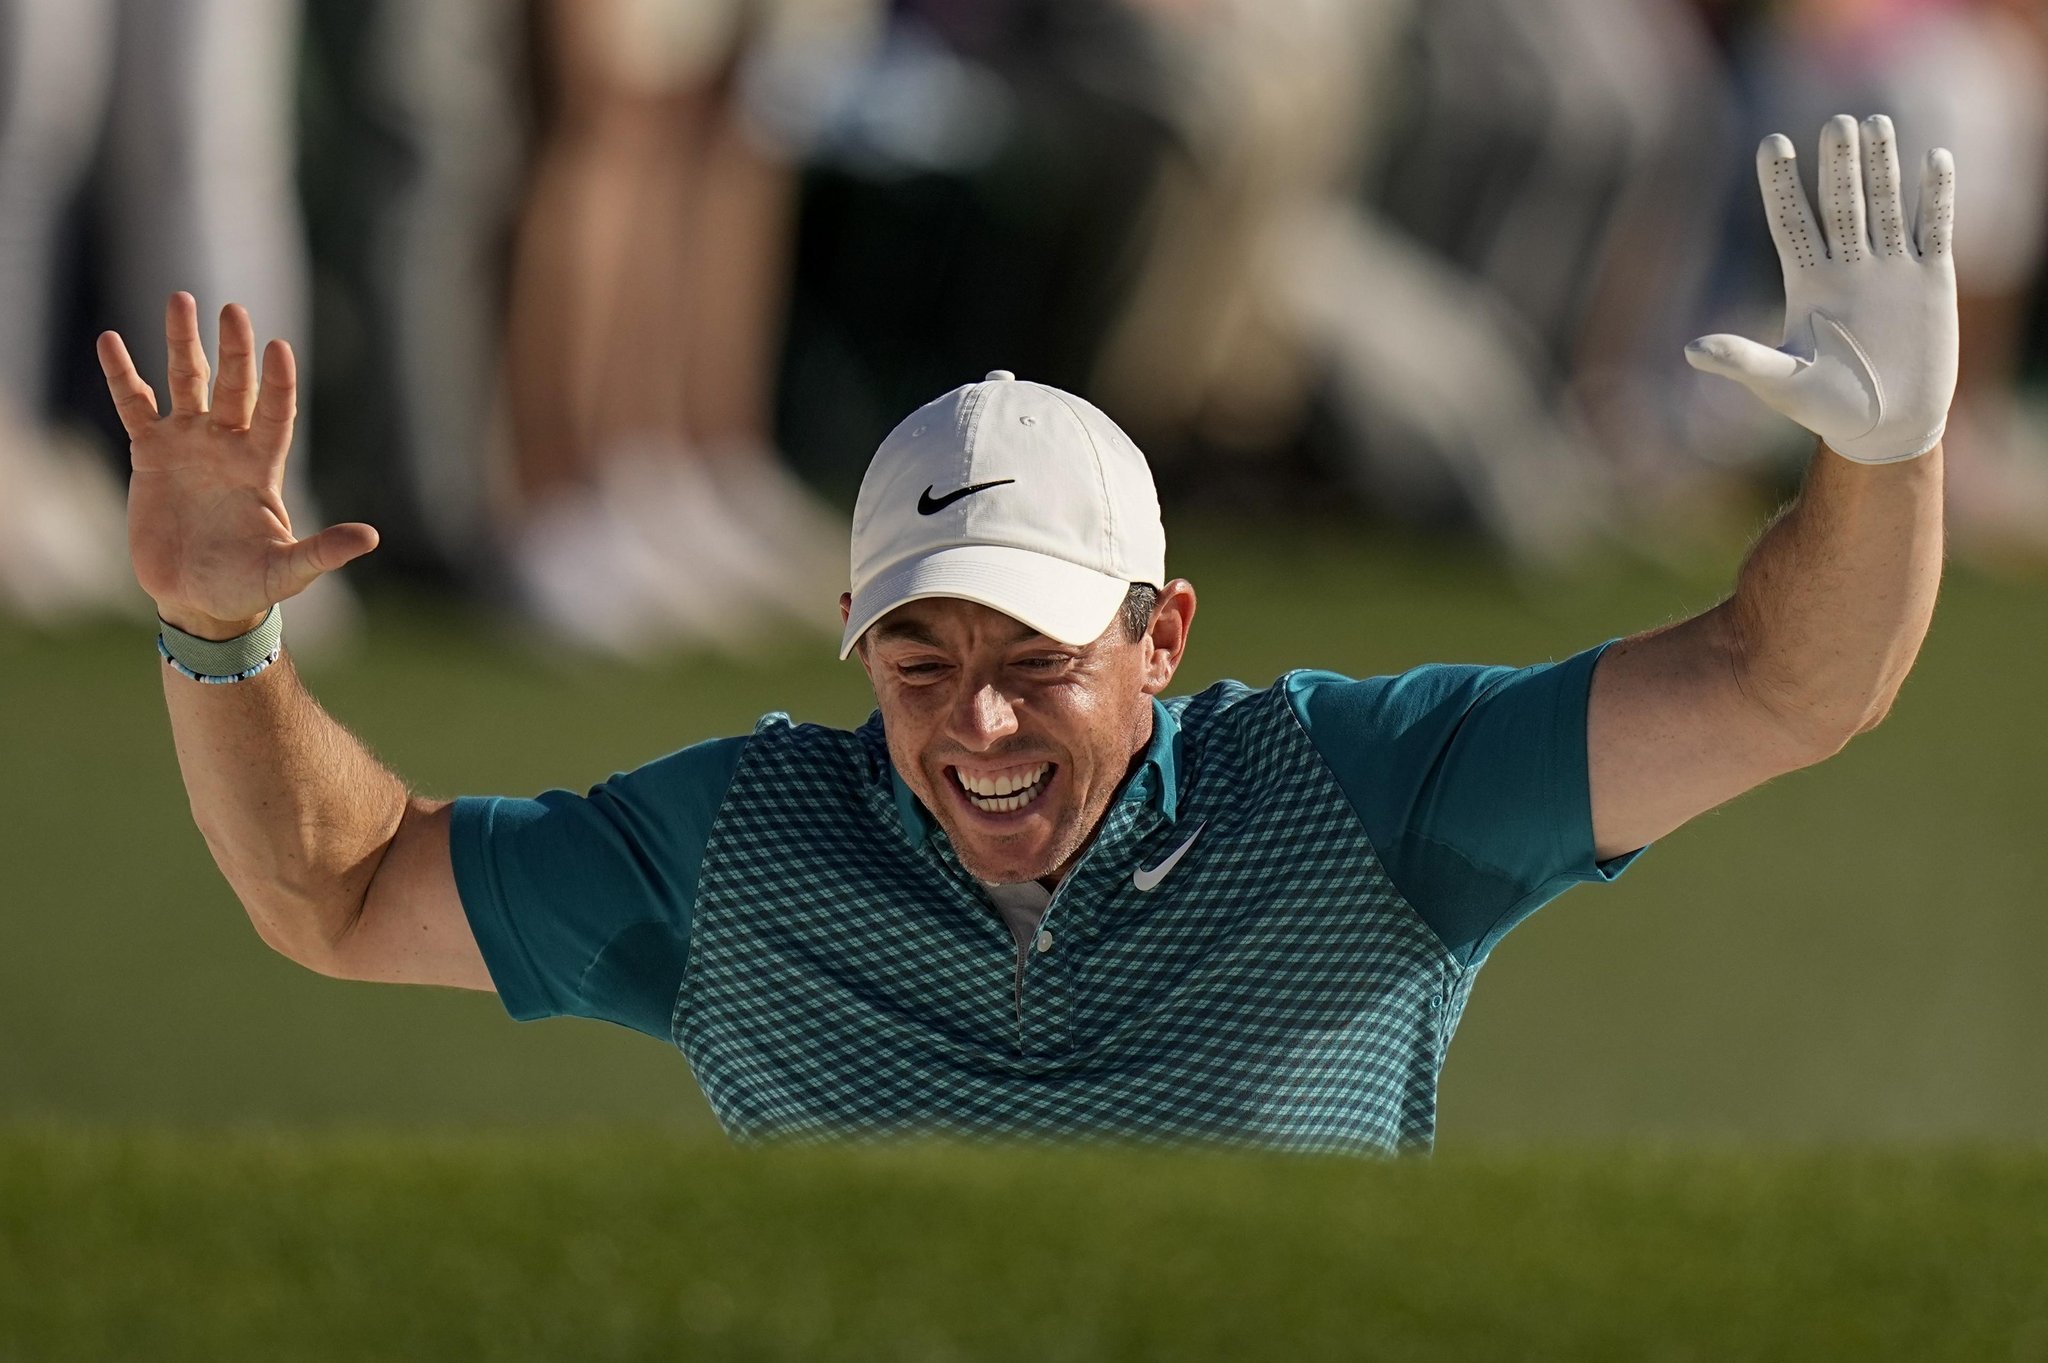 Rory McIlroy with record final Masters run as runner-up to Scottie Scheffler